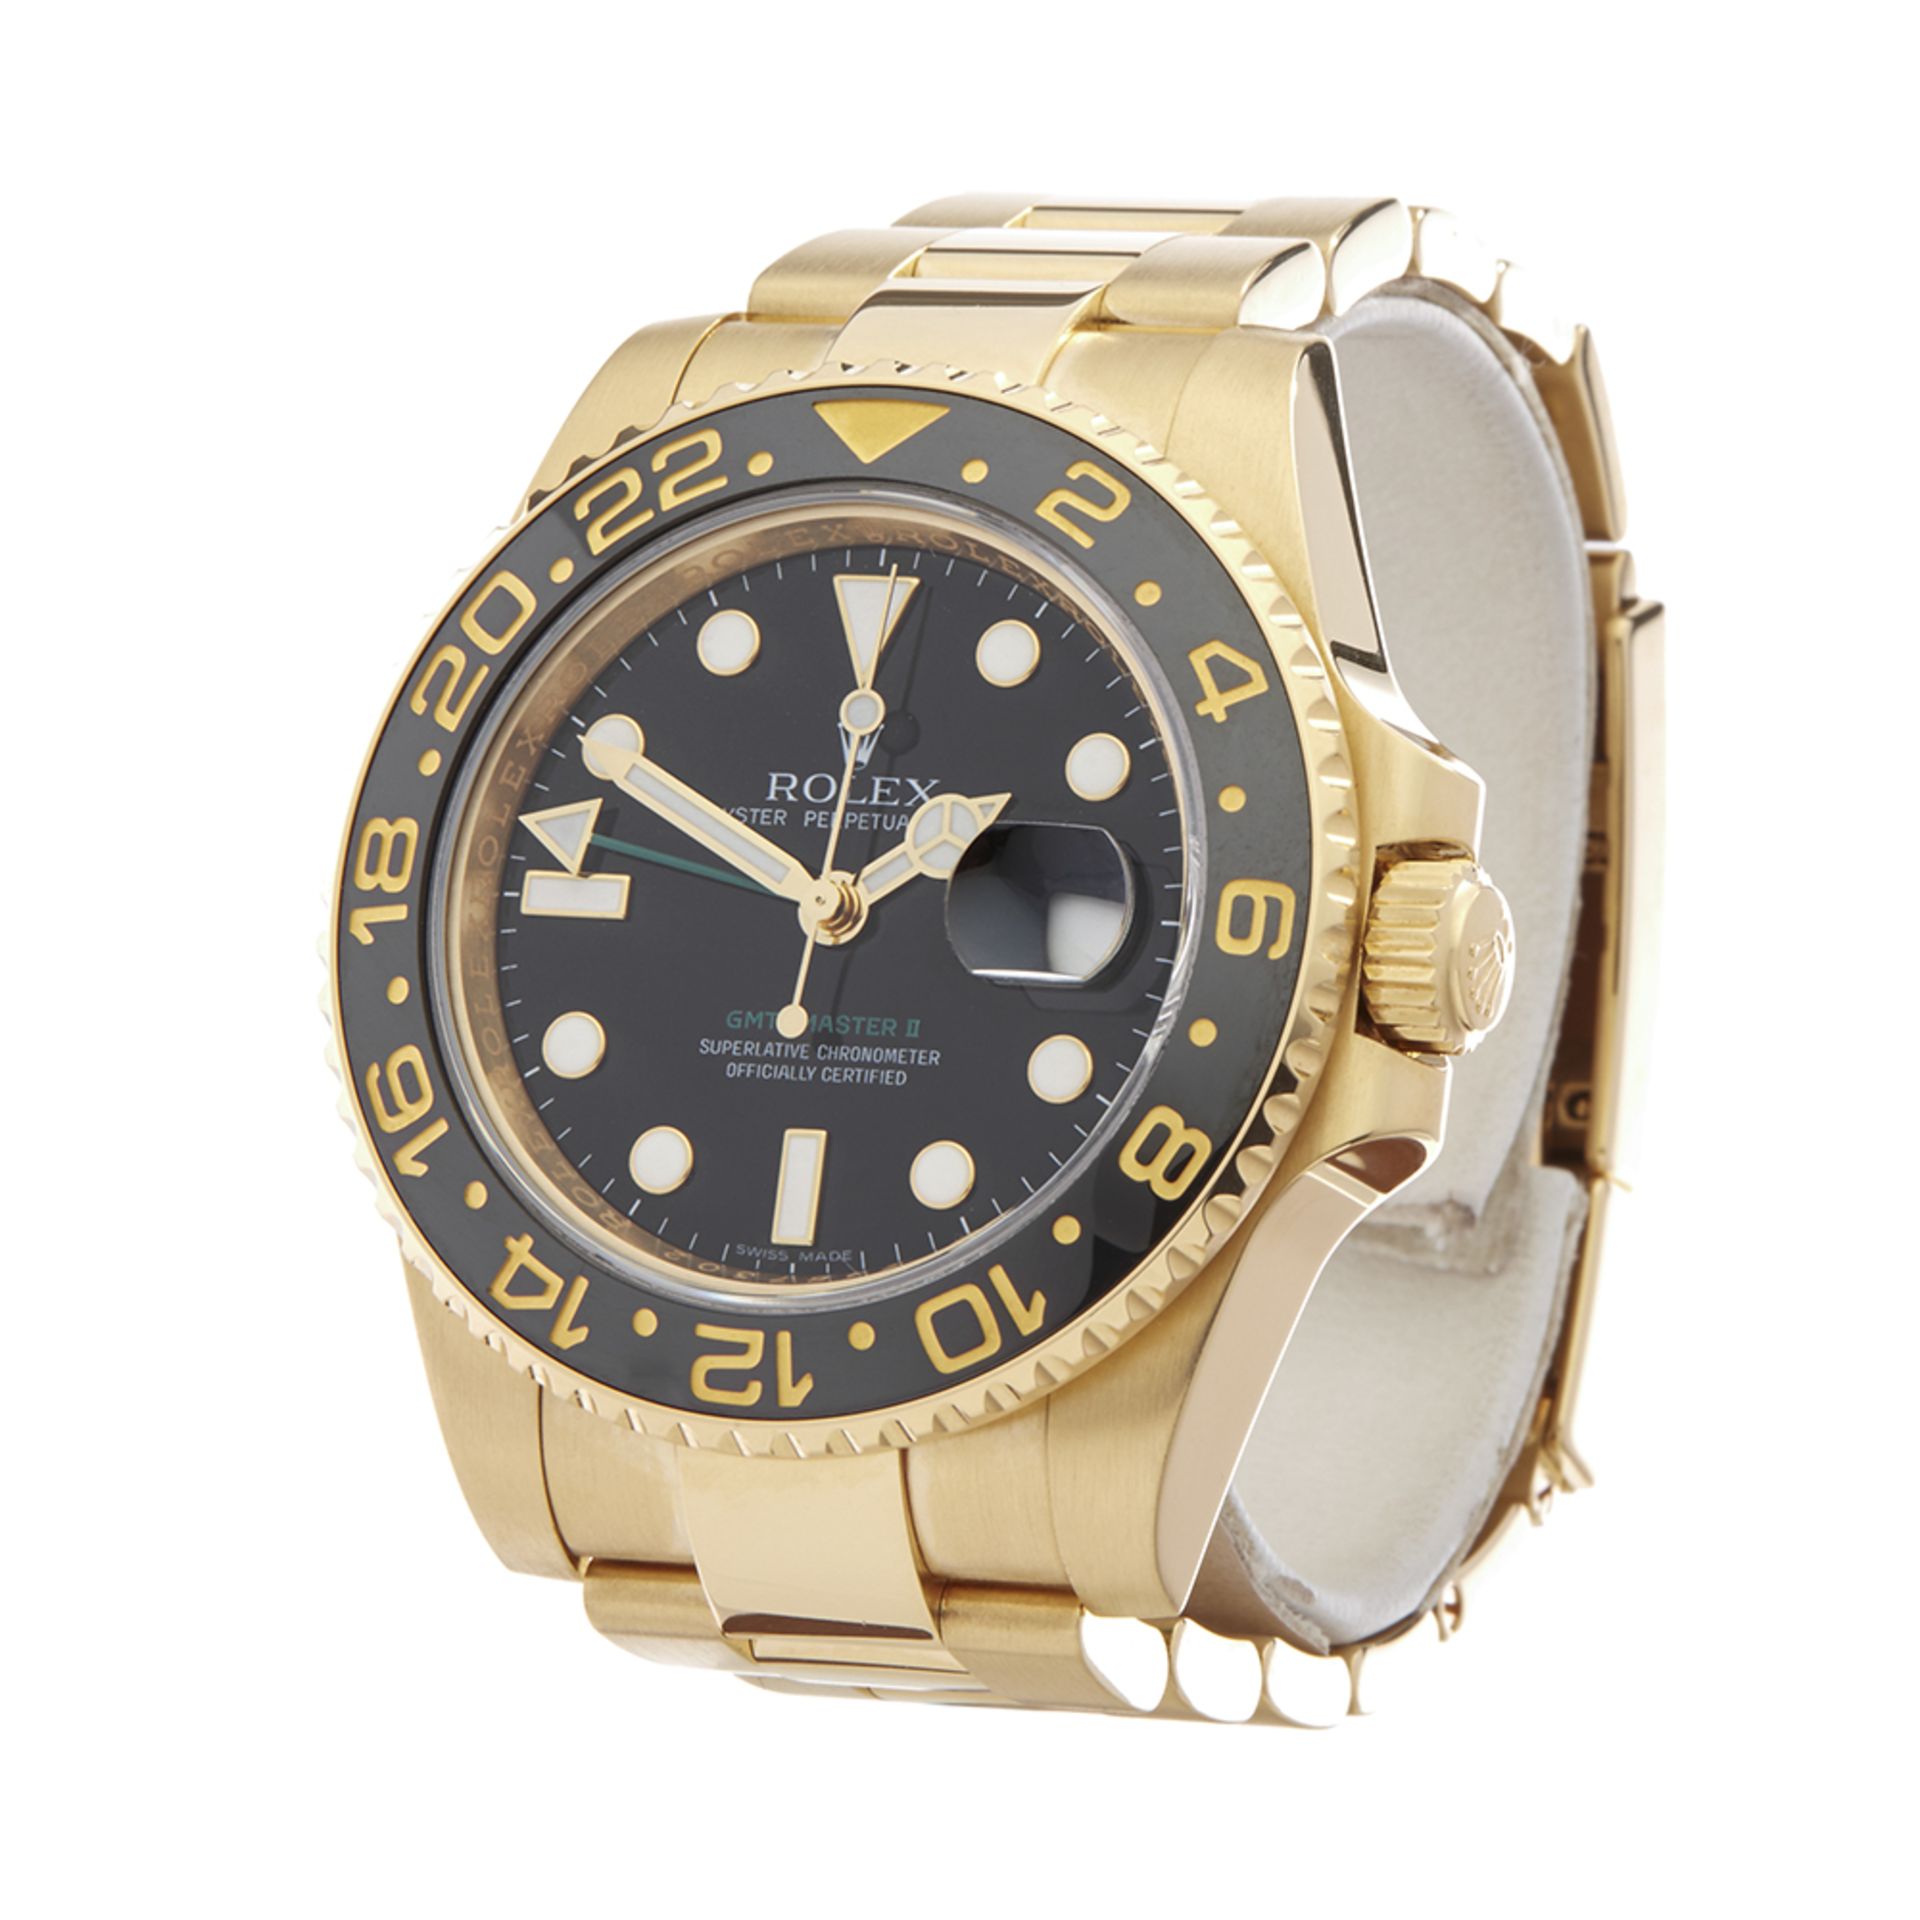 Rolex GMT-Master II 40mm 18k Yellow Gold - 116718 - Image 3 of 7